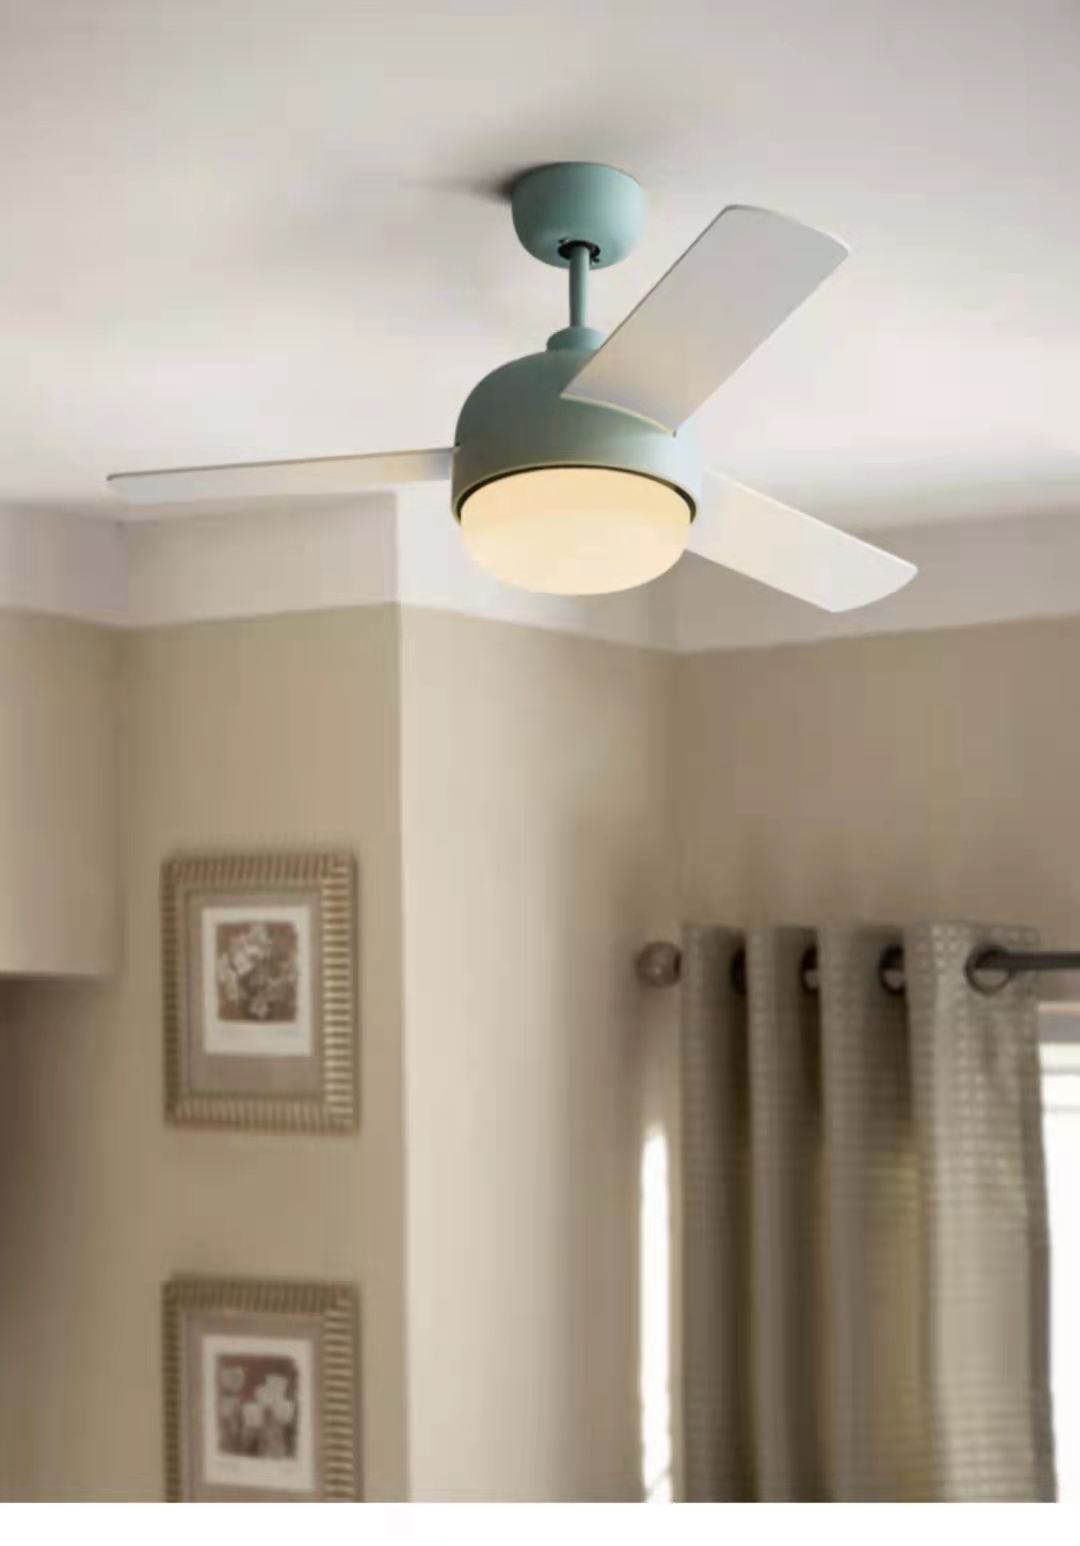 Modern fan light with remote control